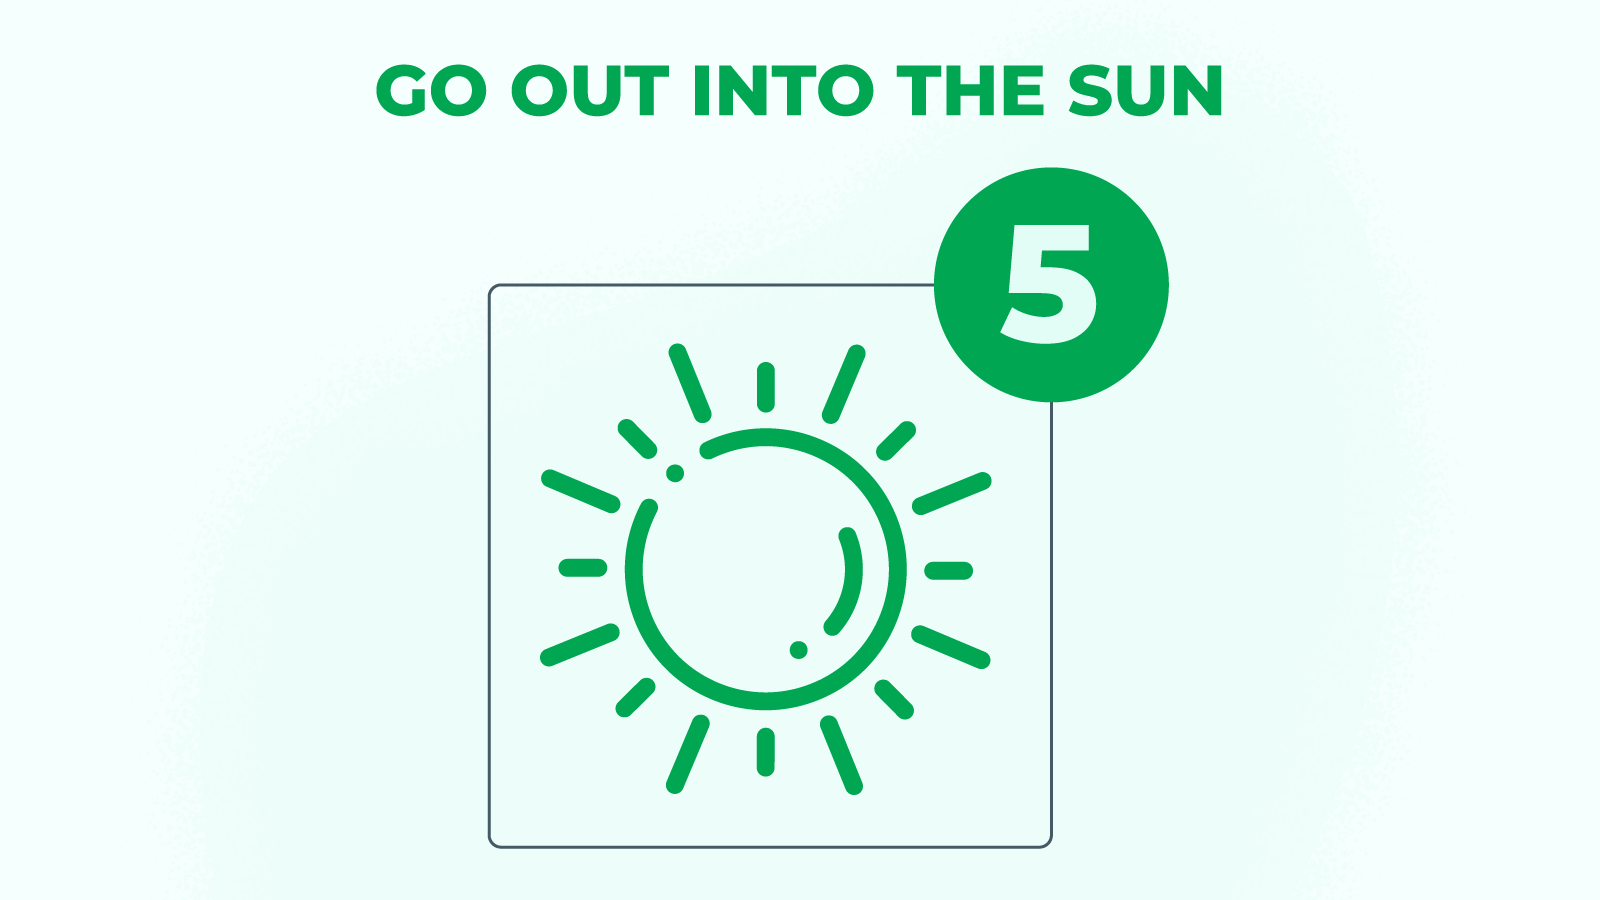 5.Go out into the Sun - stop gambling addiction